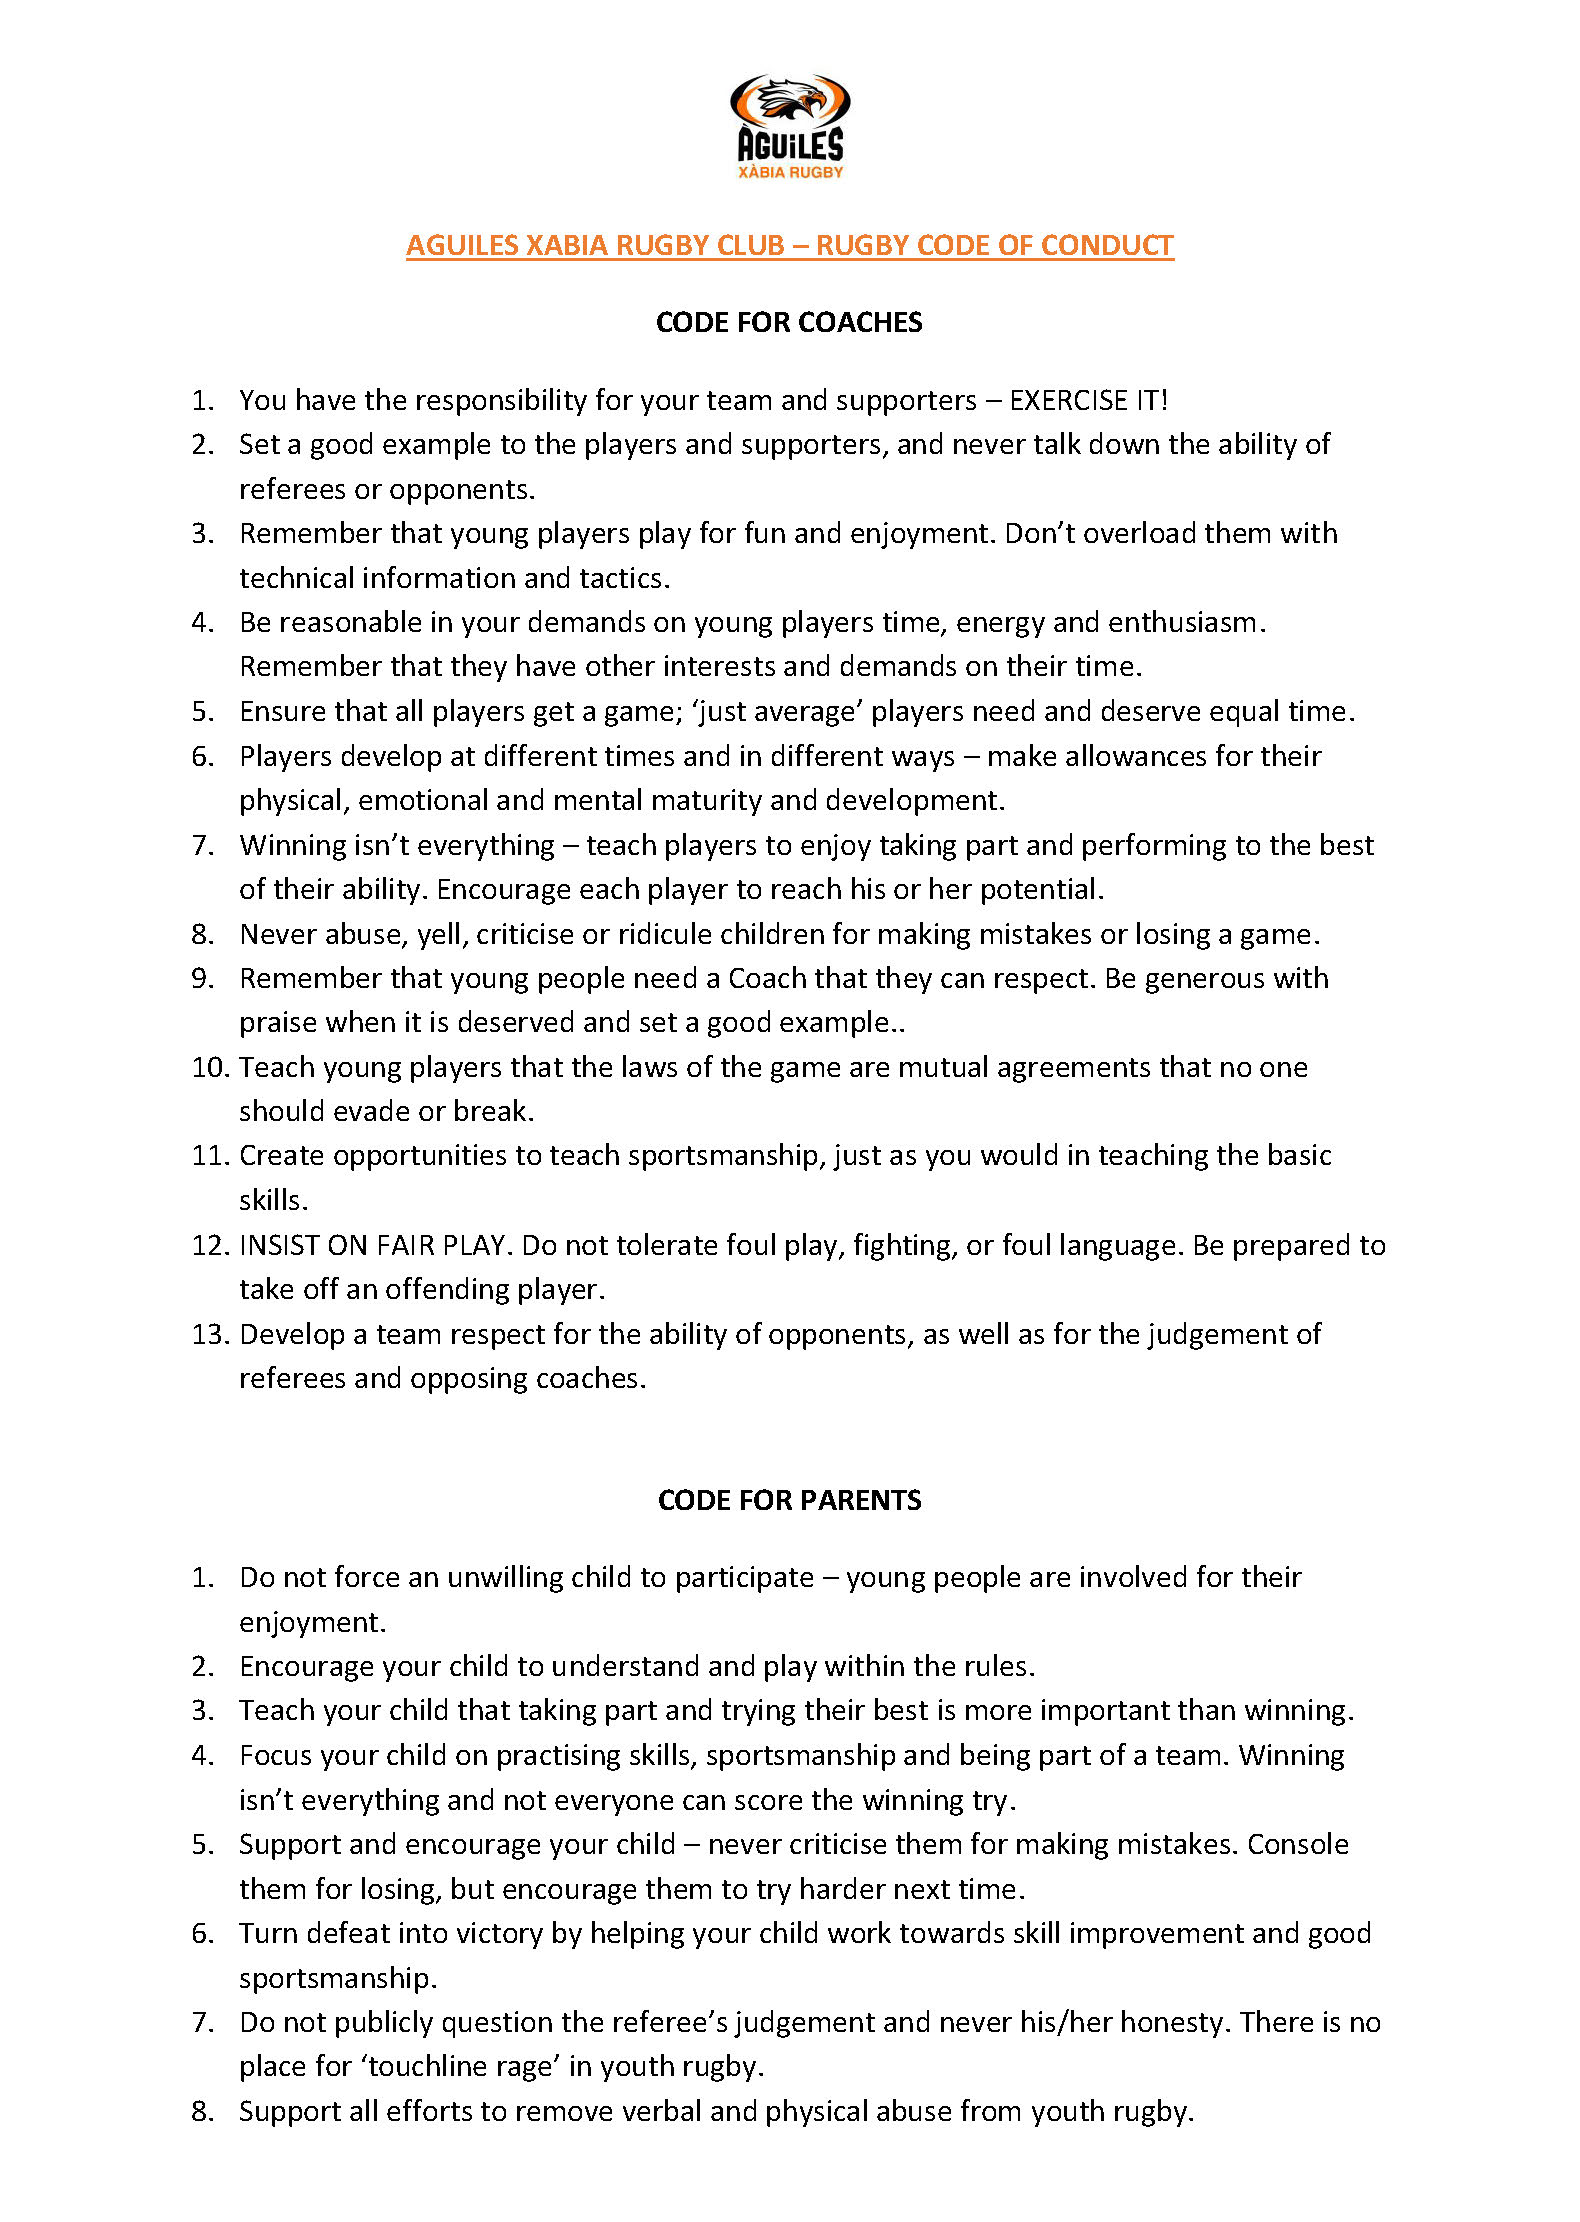 Xabia Aguiles Code of Conduct 2023_Page_1.jpg